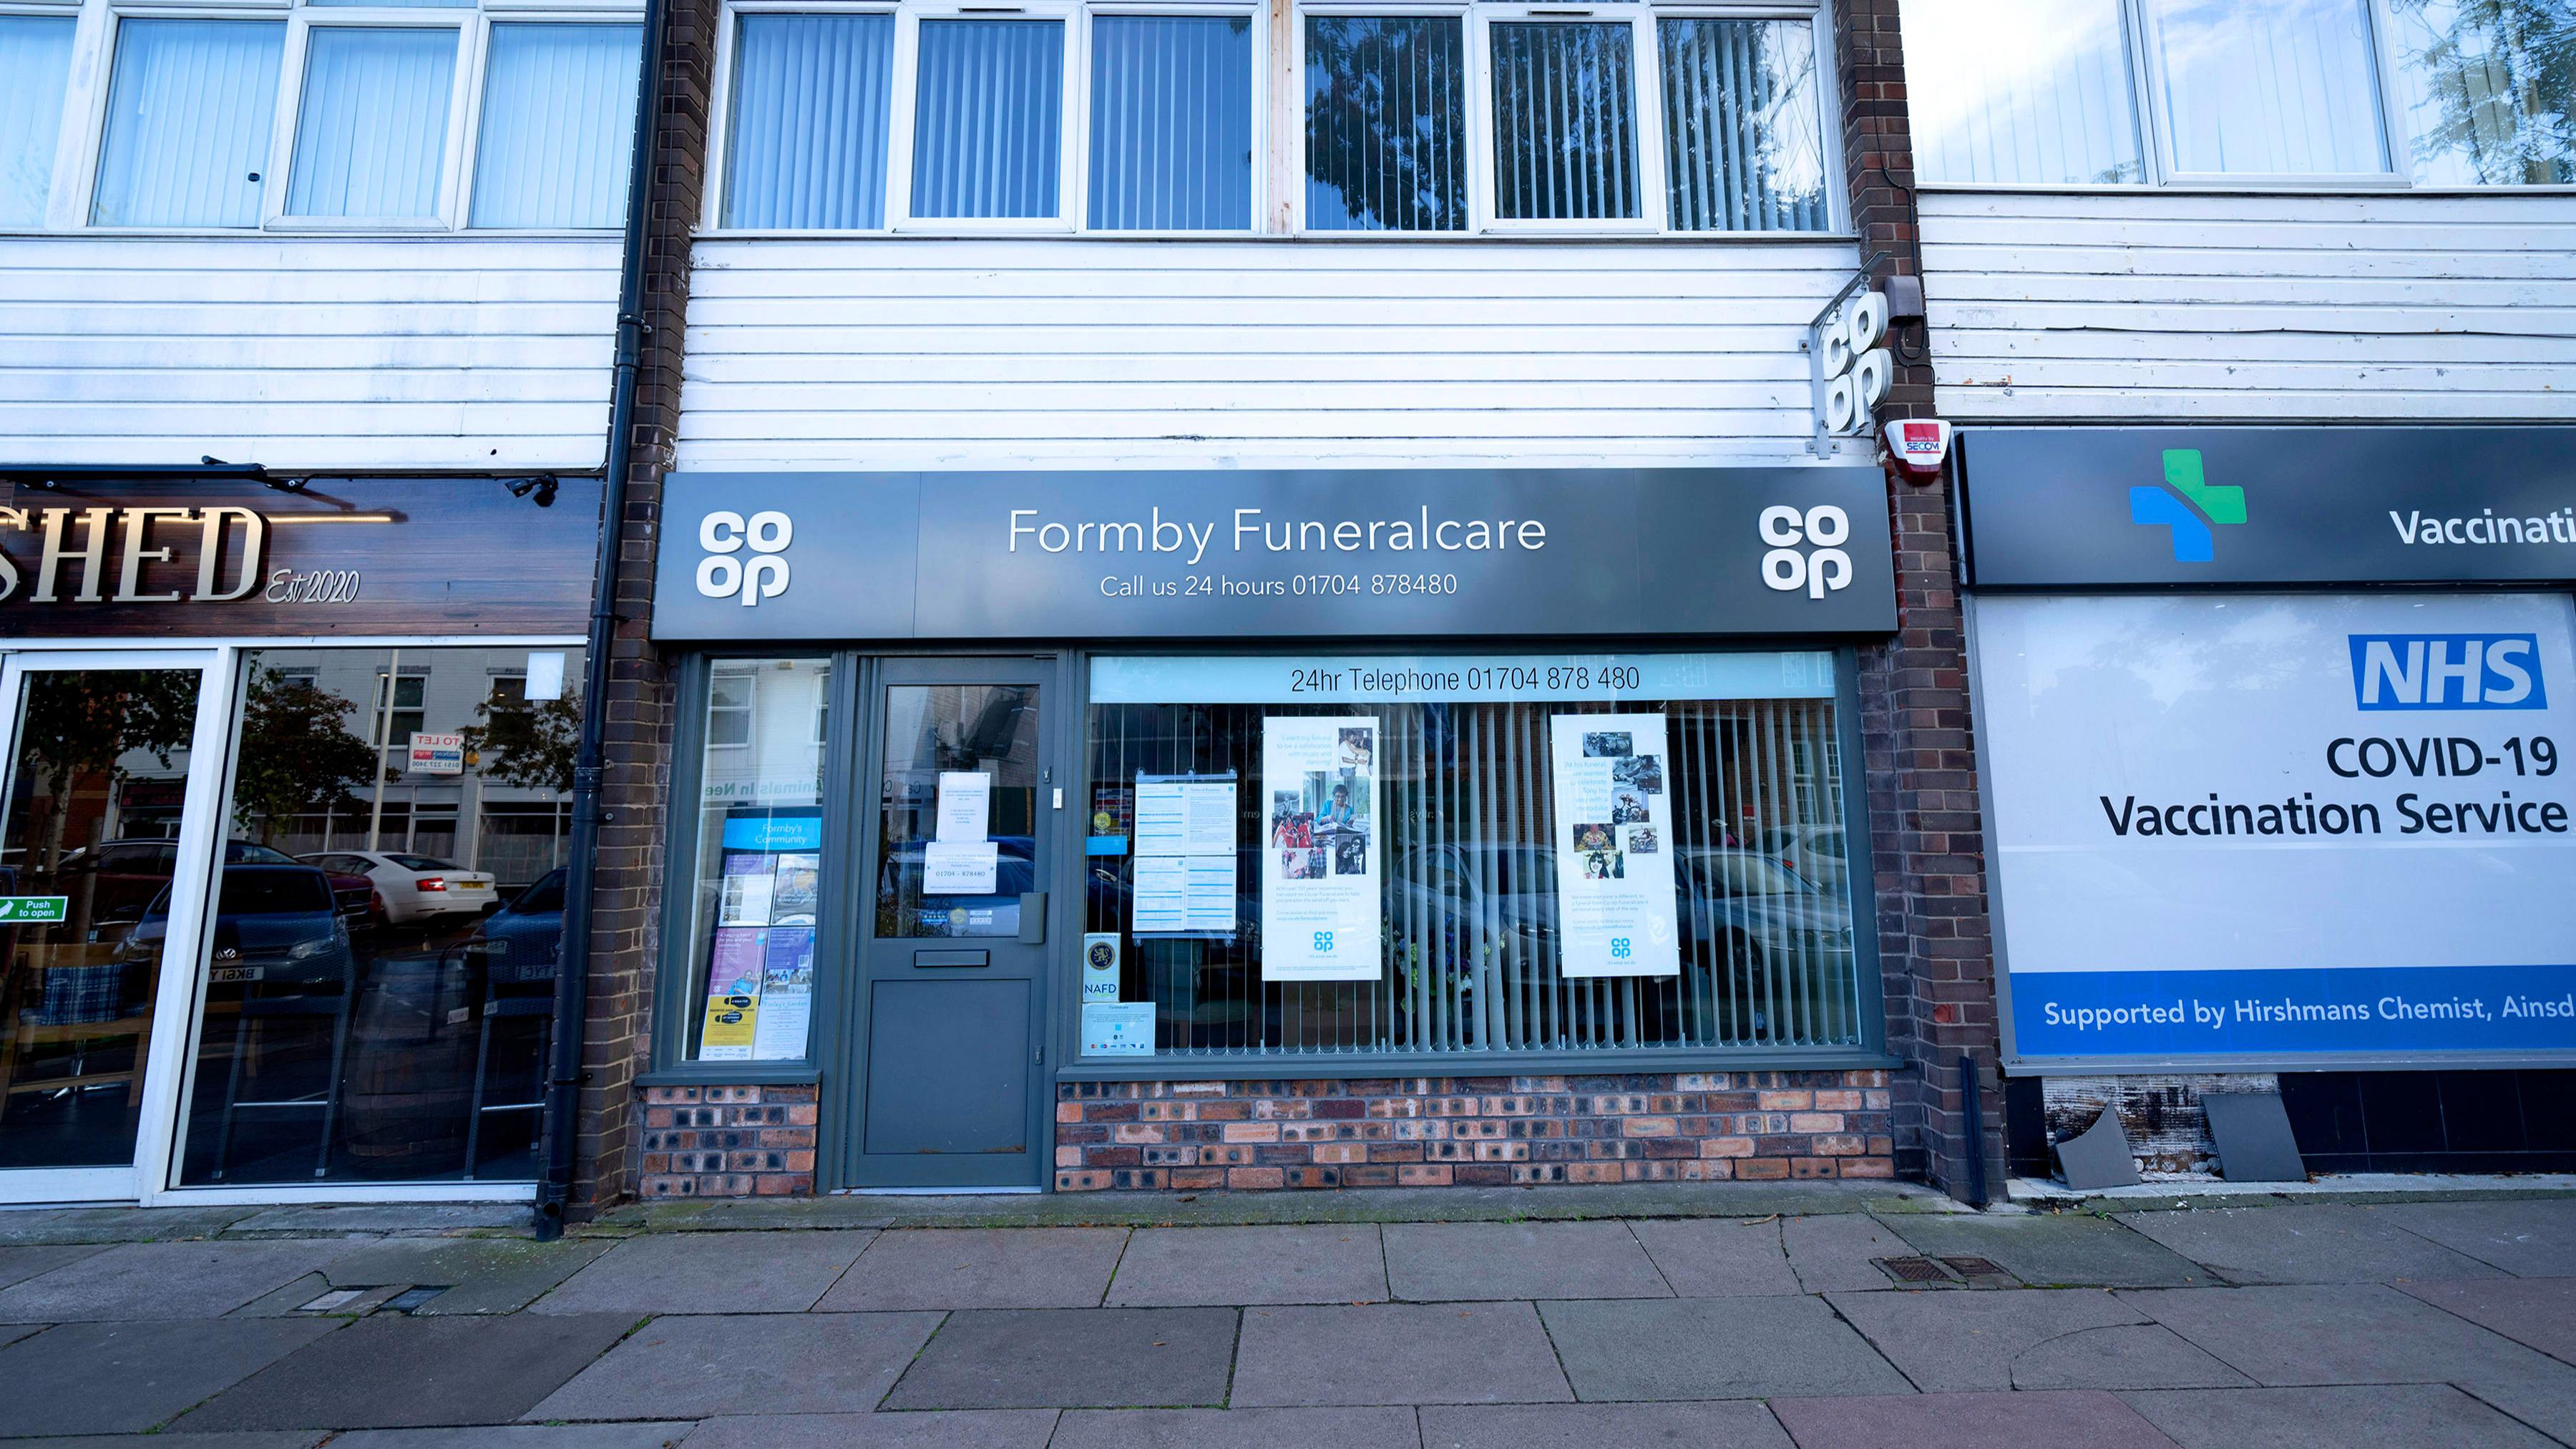 Images Formby Funeralcare